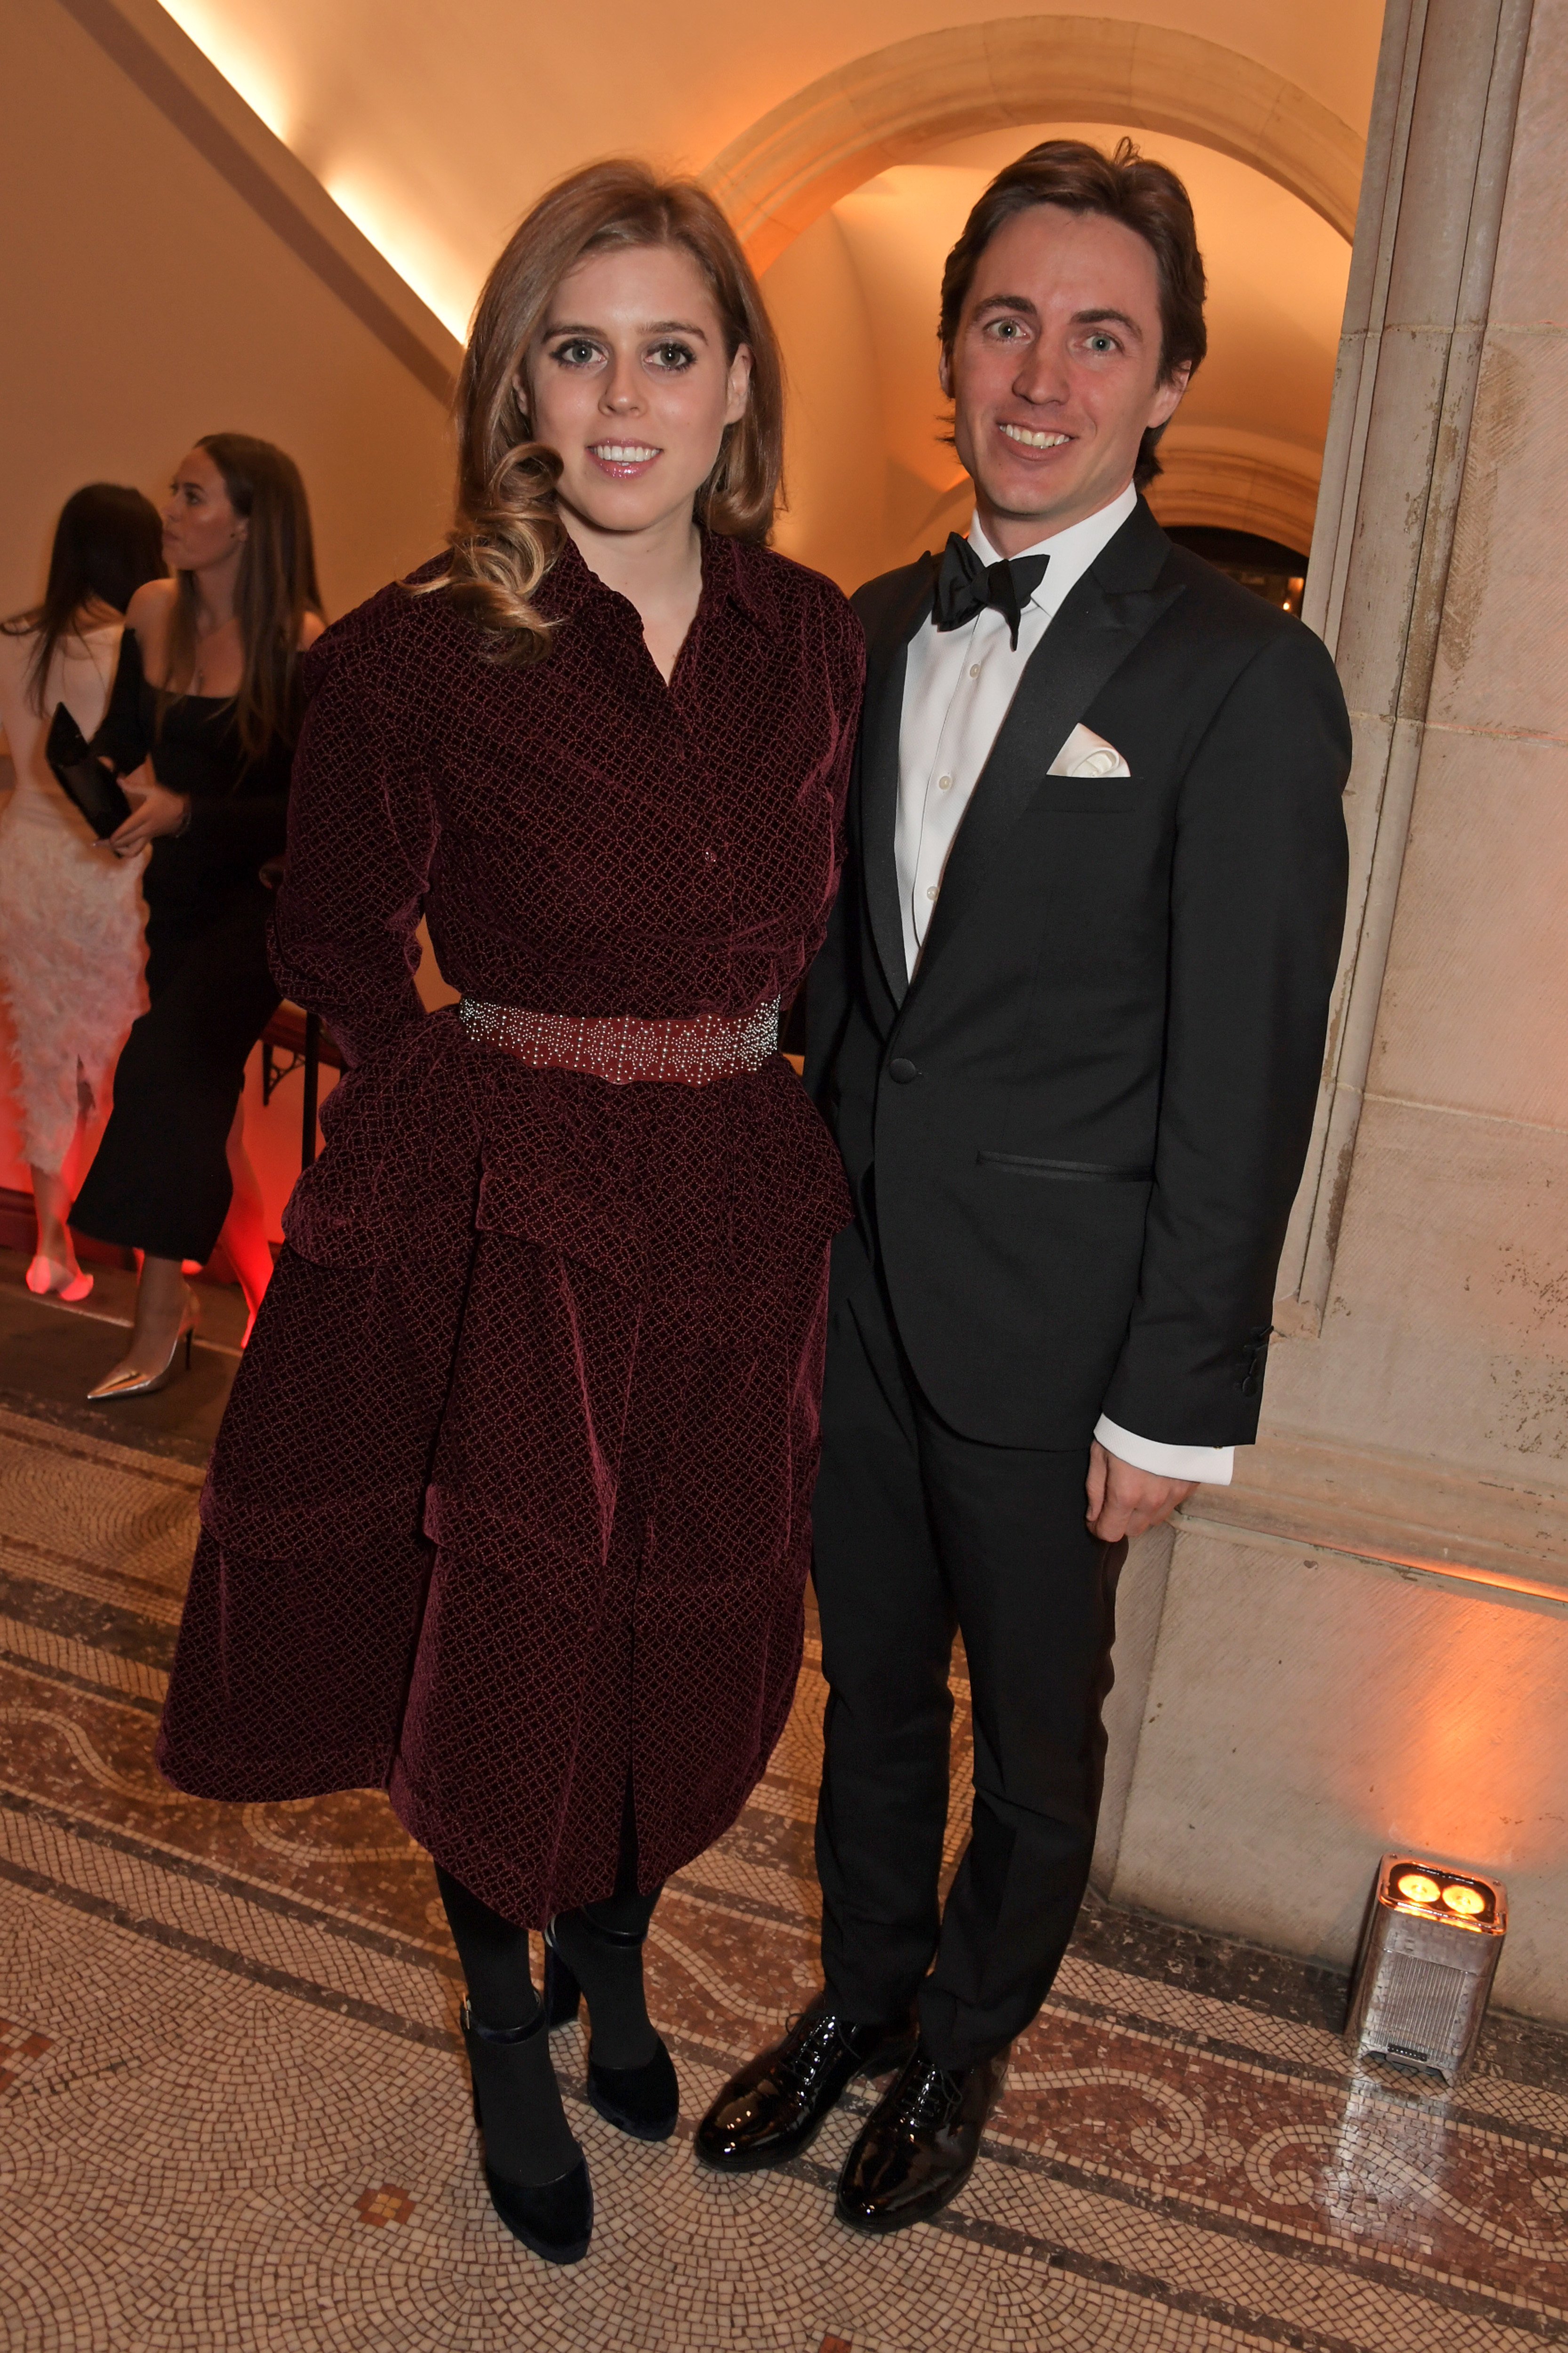 Princess Beatrice of York and Edoardo Mapelli Mozzi attend The Portrait Gala 2019 hosted by Dr Nicholas Cullinan and Edward Enninful to raise funds for the National Portrait Gallery's 'Inspiring People' project at the National Portrait Gallery on March 12, 2019 in London, England.| Source: Getty Images